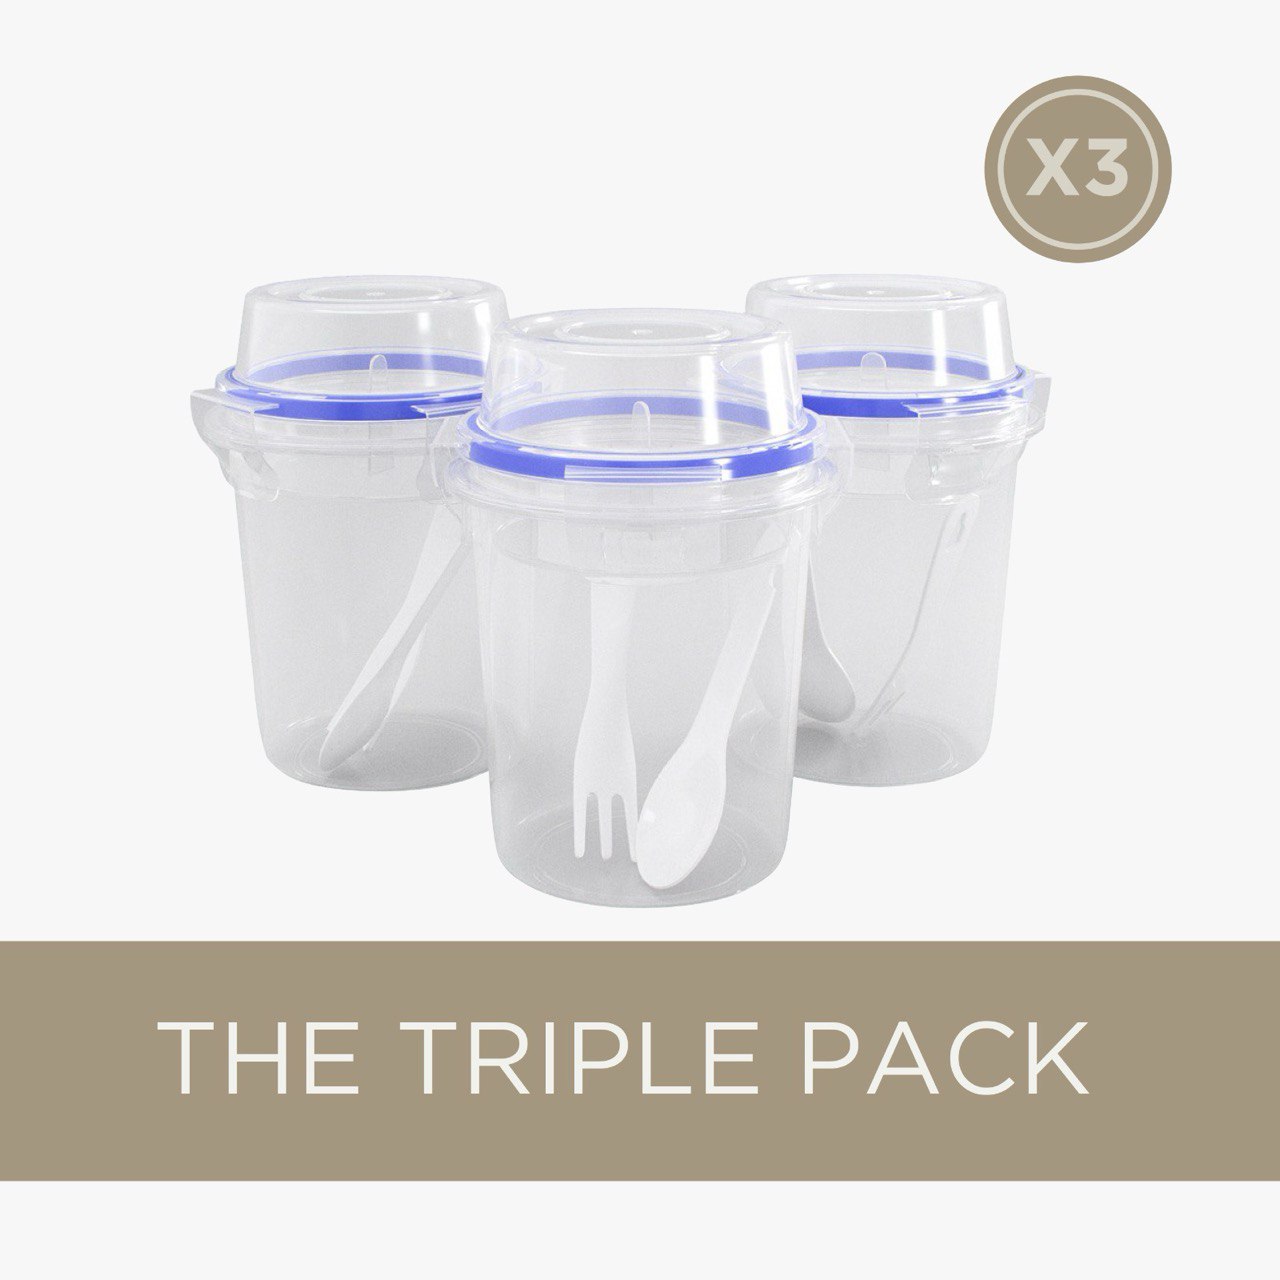 TRIPLET PACK - Set 3 Meal prep containers